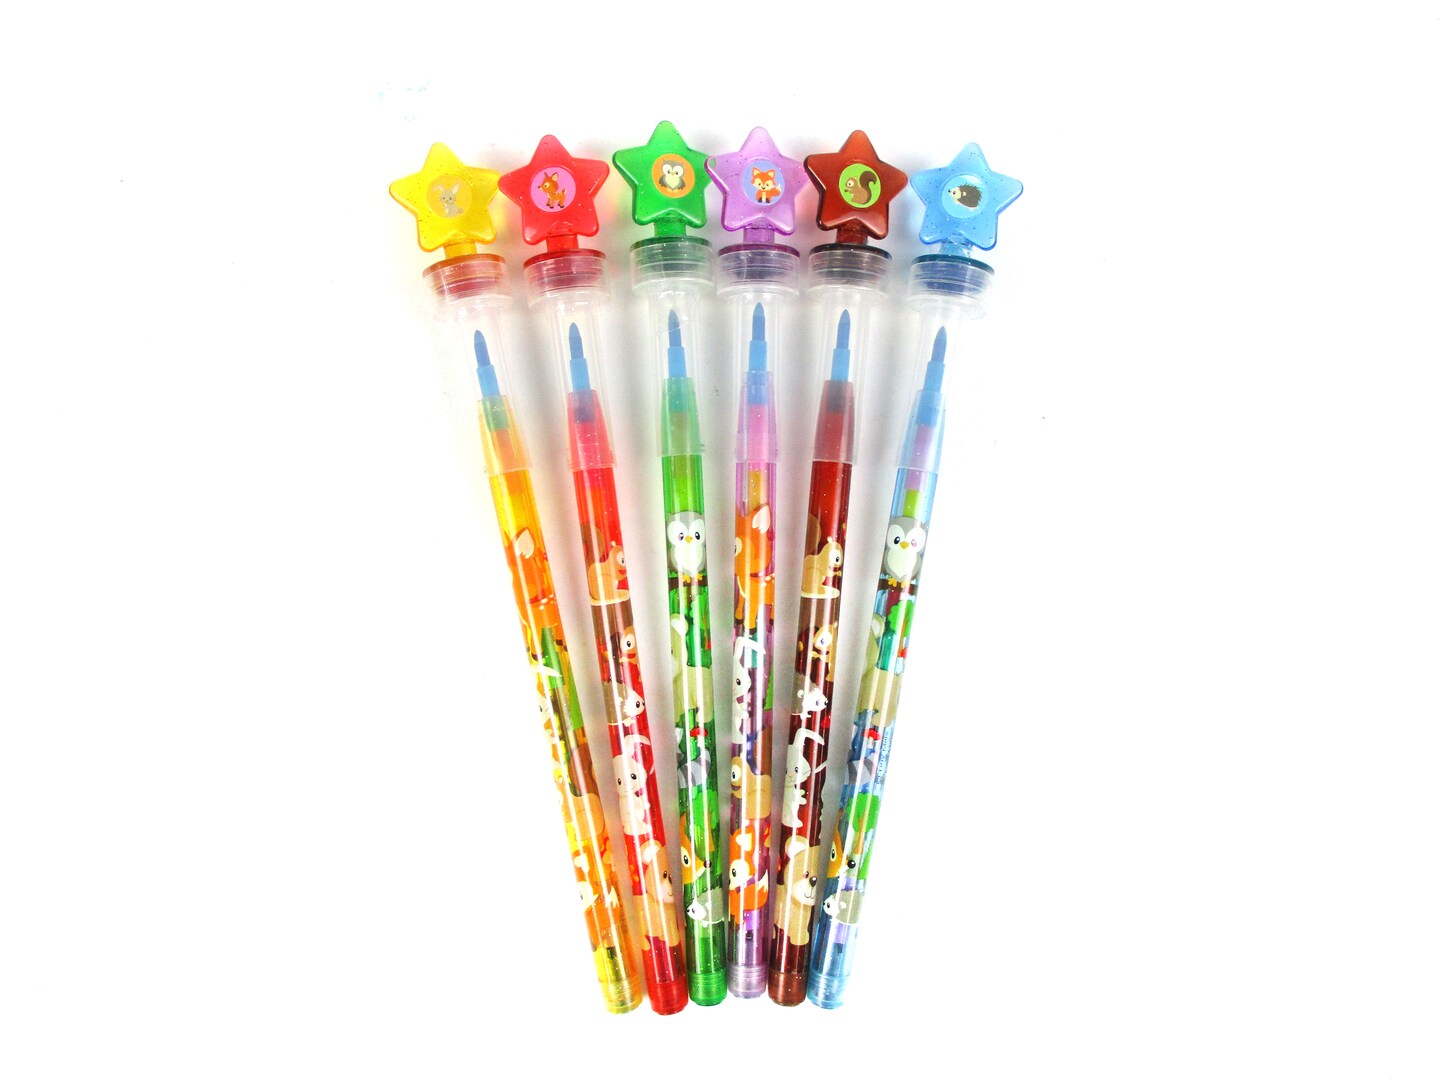 TINYMILLS 24 Pcs Woodland Animals 2 in 1 Stackable Stacking Crayon with Extra Stamper Topper,